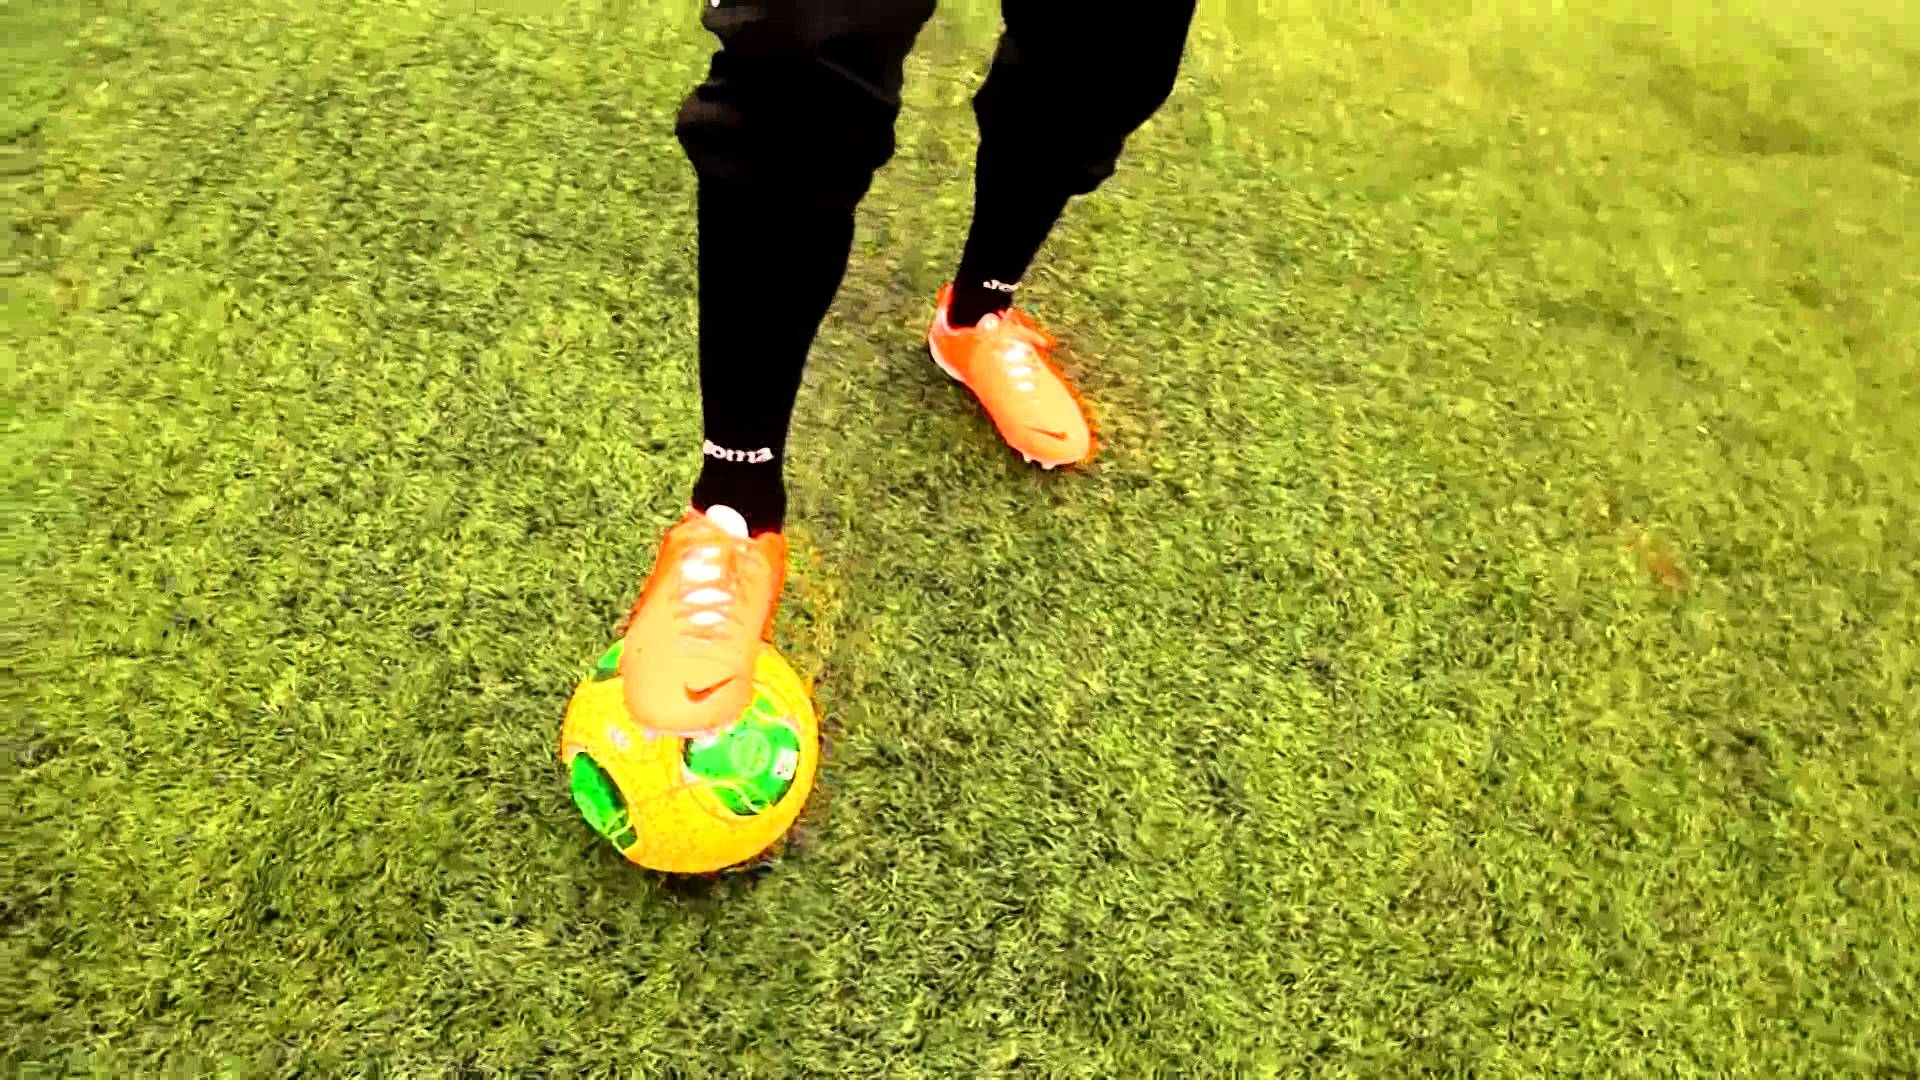 Top 10 Tekkers: Featuring Jeand Doest, Ahmed Rakaba, Tobias Becs and More!